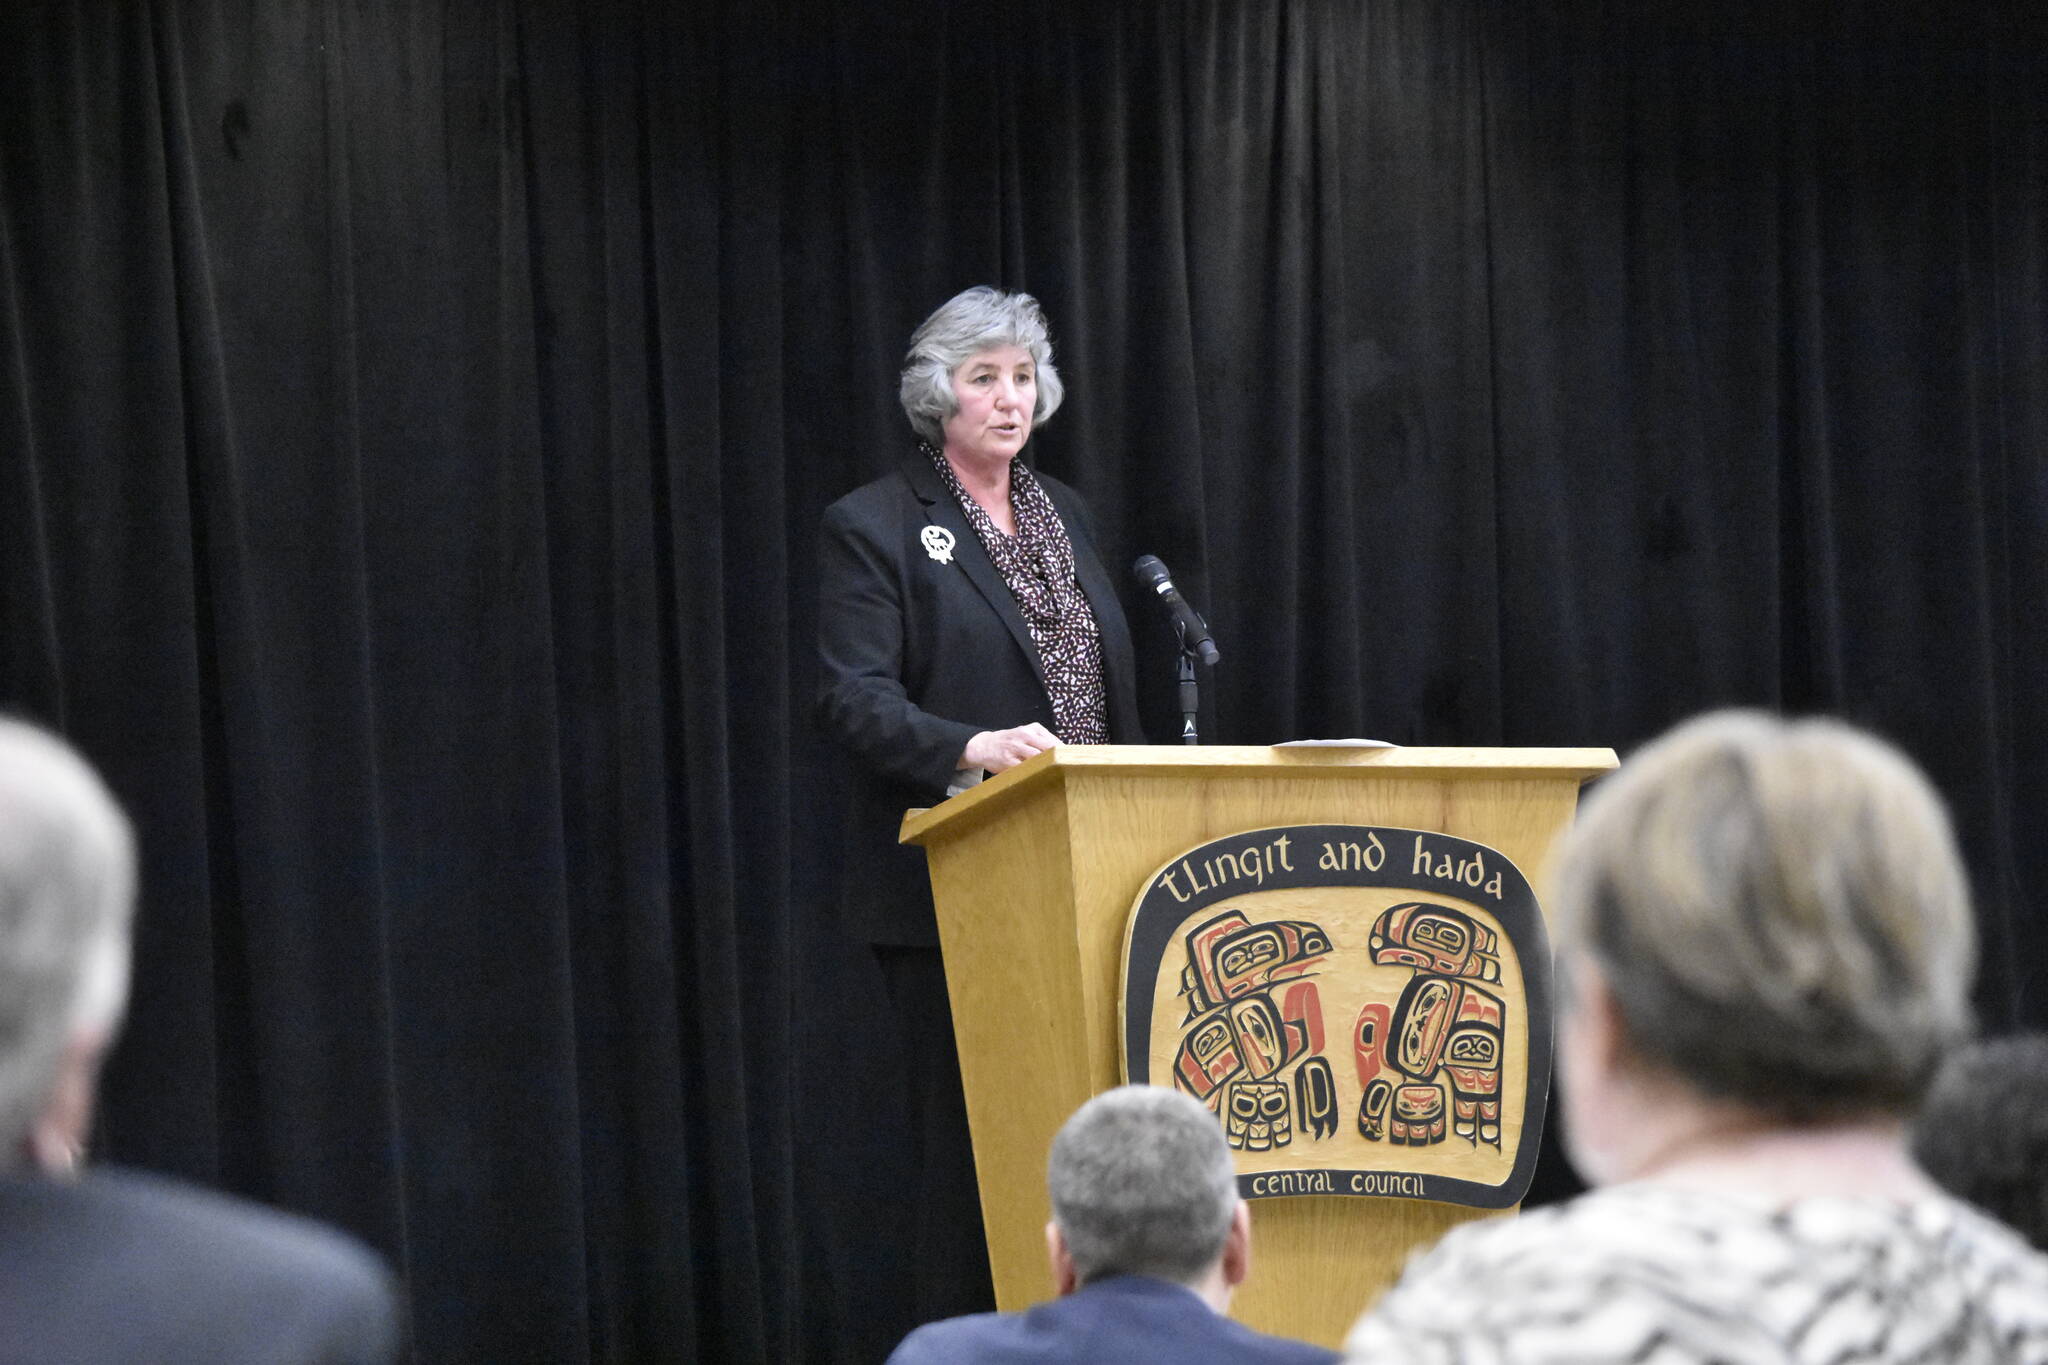 University of Alaska President Pat Pitney spoke to the Juneau Chamber of Commerce Luncheon at Elizabeth Peratrovich Hall on Thursday, March 3, 2022, emphasizing the system’s importance to the state’s workforce. (Peter Segall / Juneau Empire)